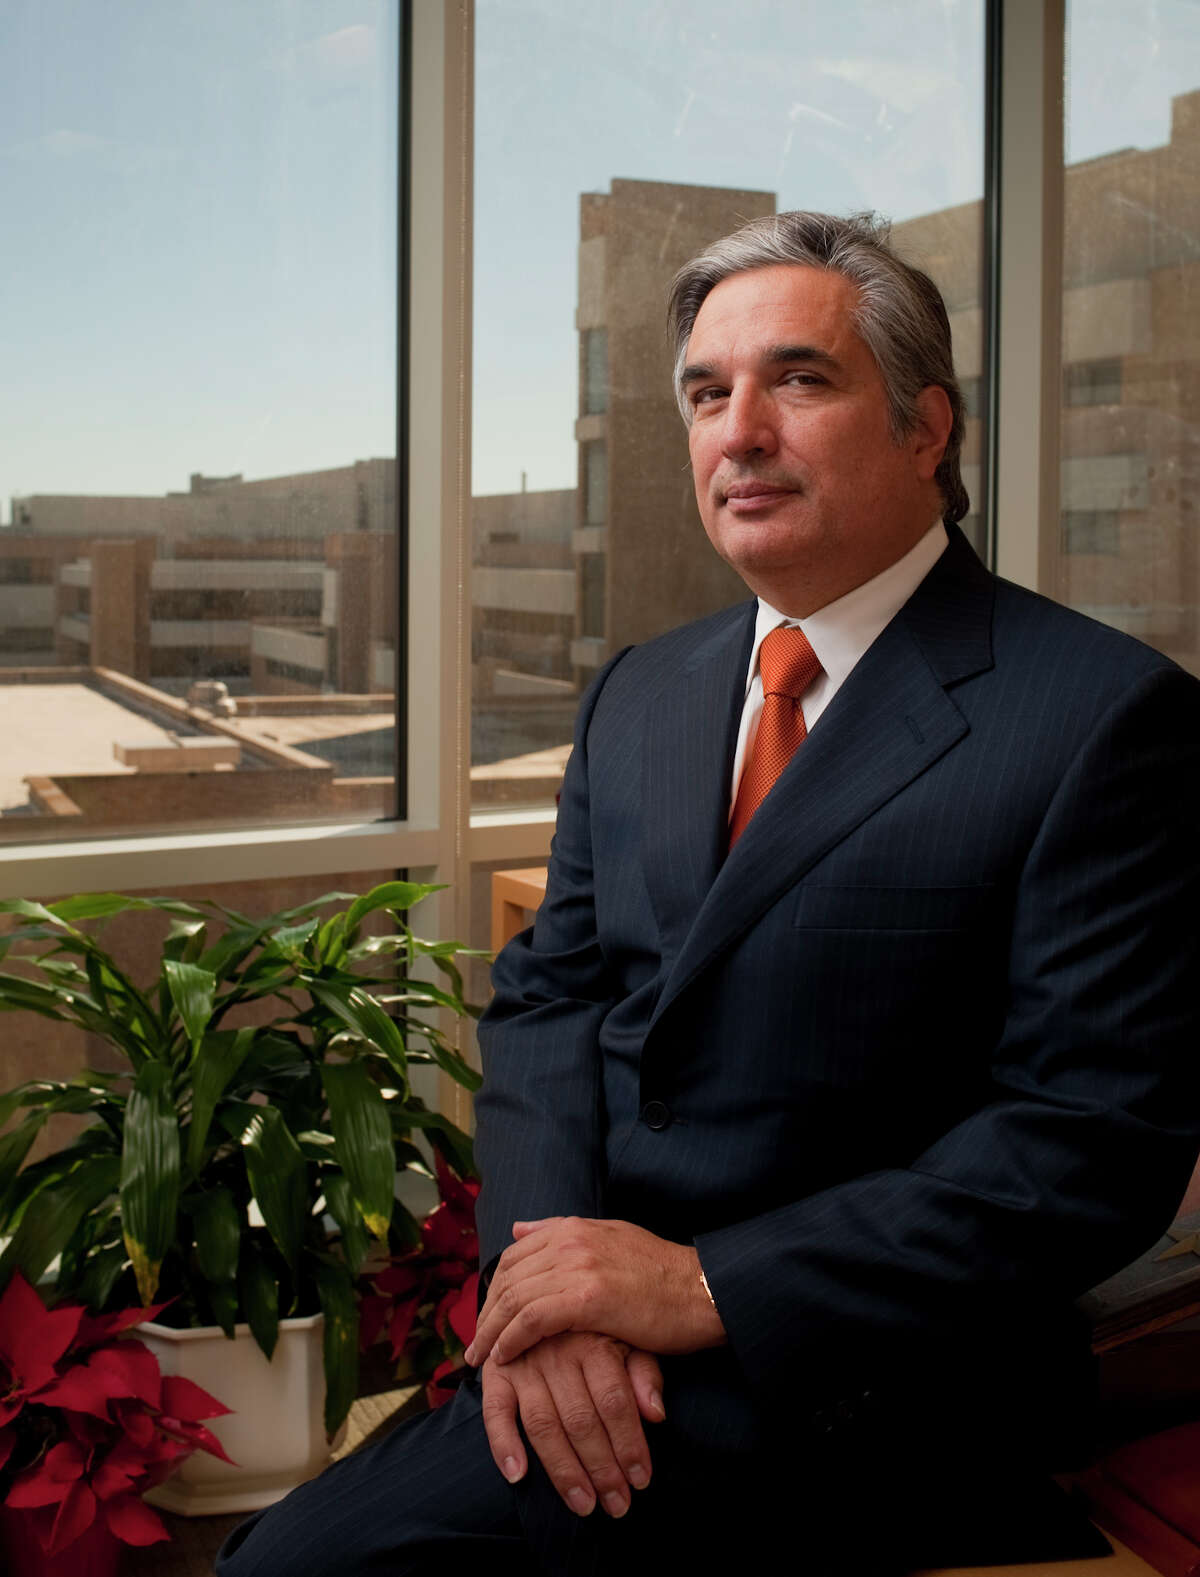 Chancellor Francisco G. Cigarroa, M.D.: The UT System is on board with efforts to boost graduation rates.